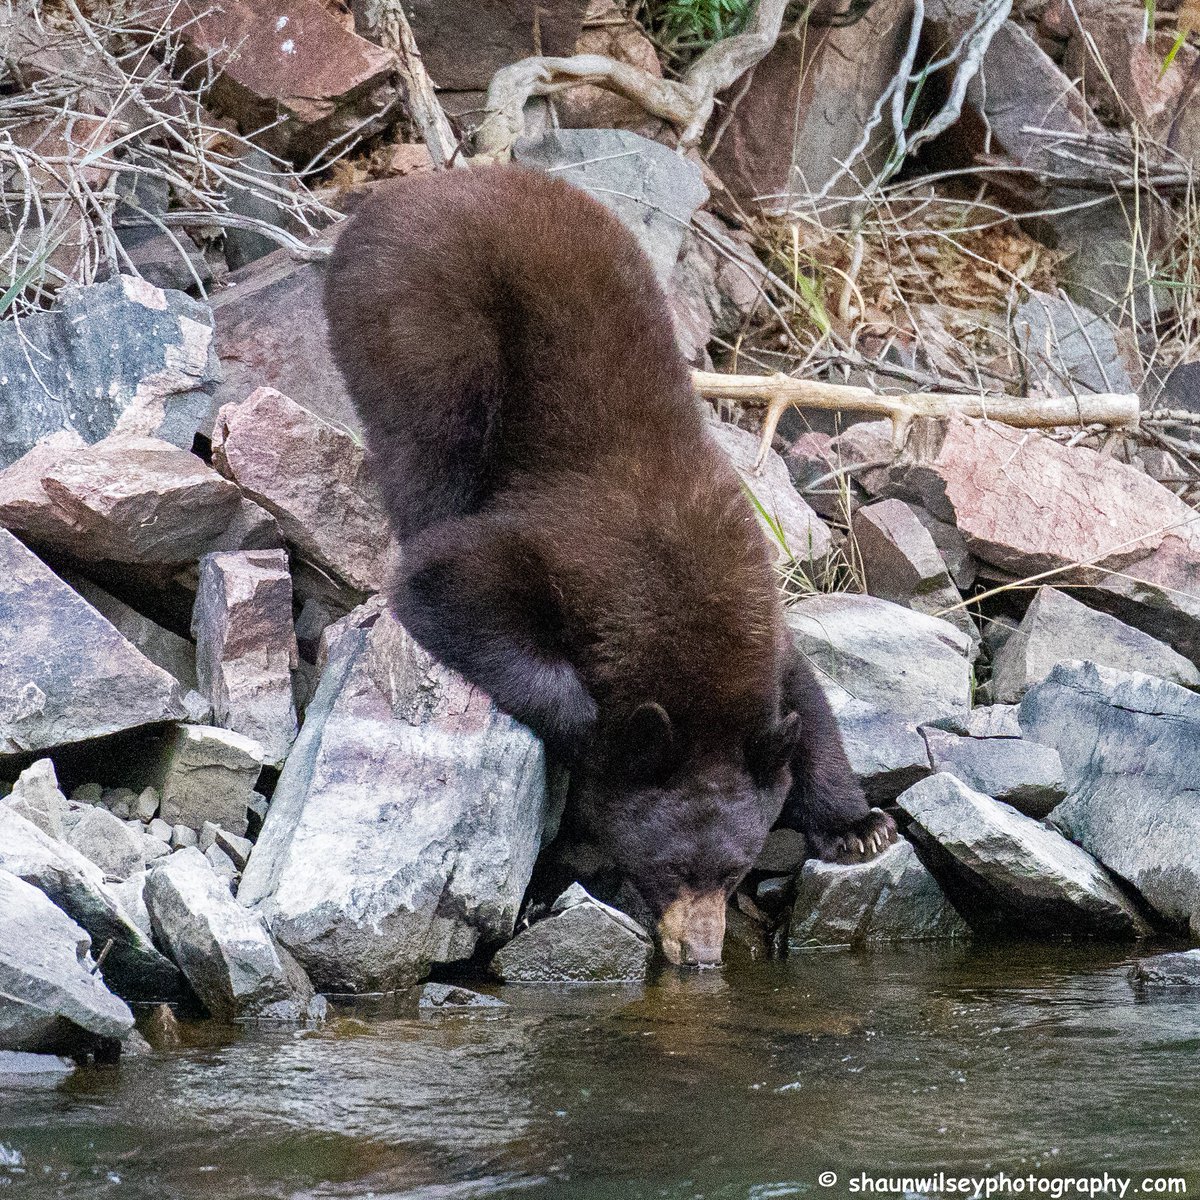 Black Bear getting an early morning drink. Colorado 8/21/2022. #colorado #coloradophotography #photography #wildlife #wildlifephotography #bear #bears #bearlovers #blackbear #blackbears #drink #drinking